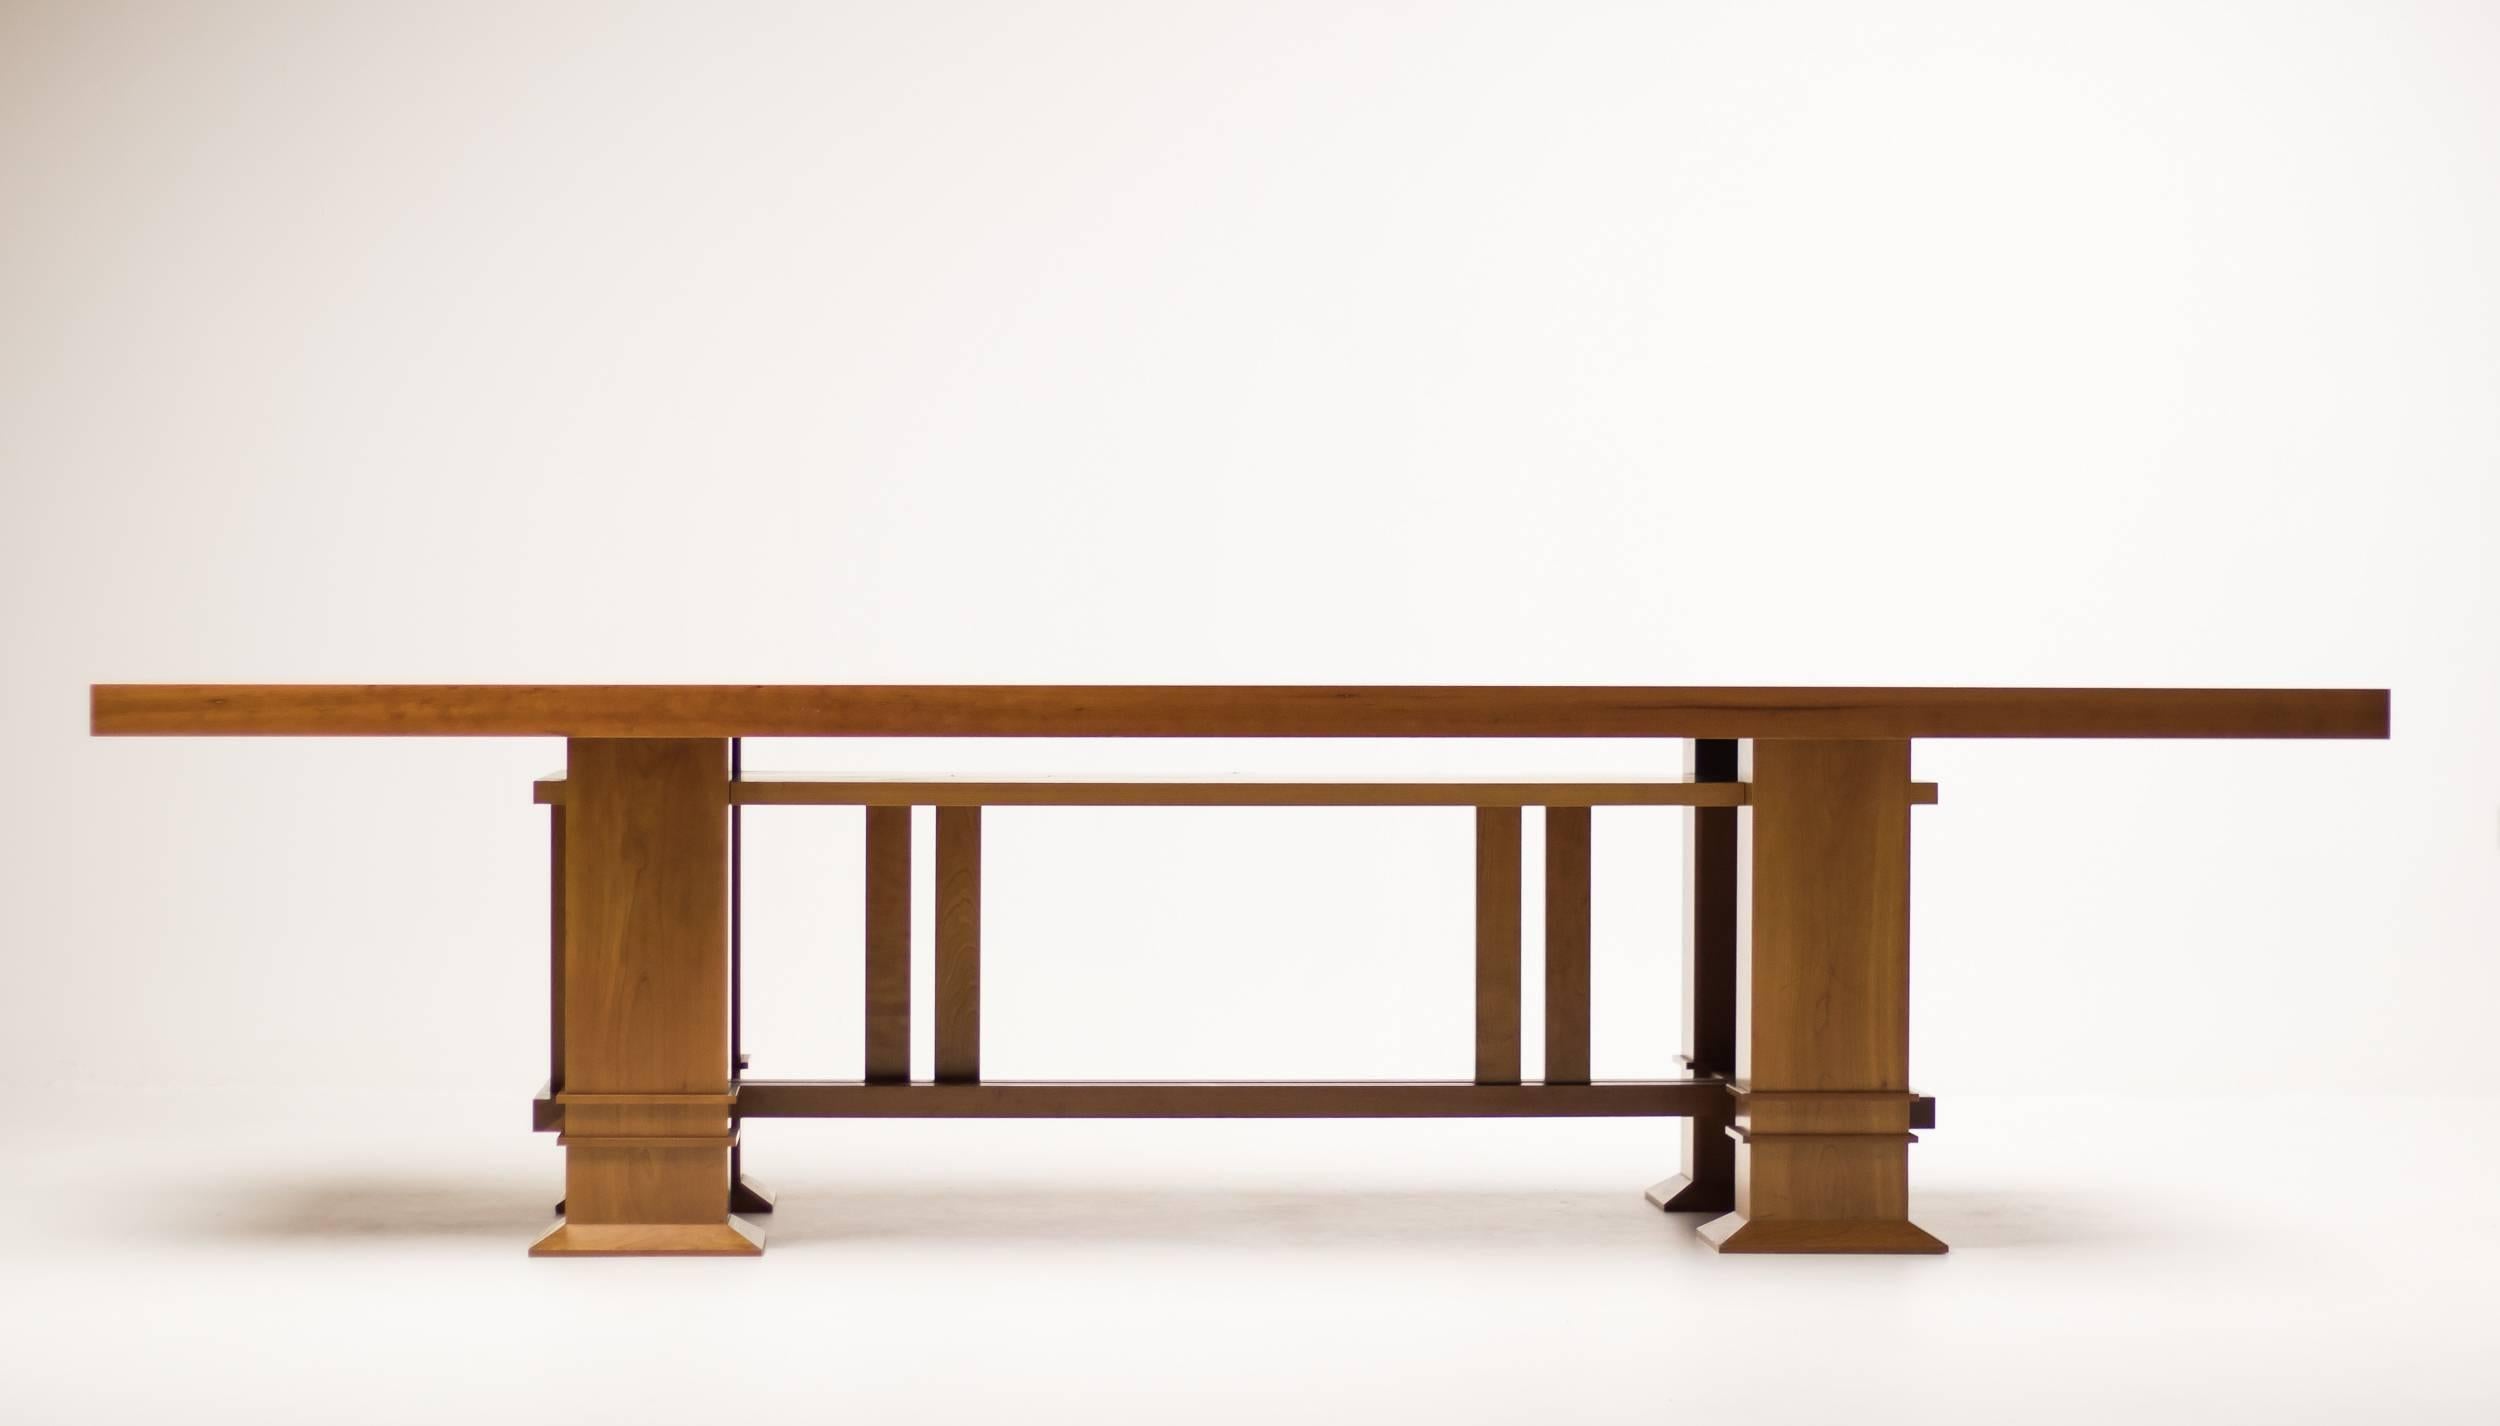 Rare 605 Allen table in cherrywood, designed in 1917 by Frank Lloyd Wright and made by Cassina.
This is the long version of this very impressive Frank Lloyd Wright table.
Marked with Cassina stamp, serial no. and Frank Lloyd Wright signature, made